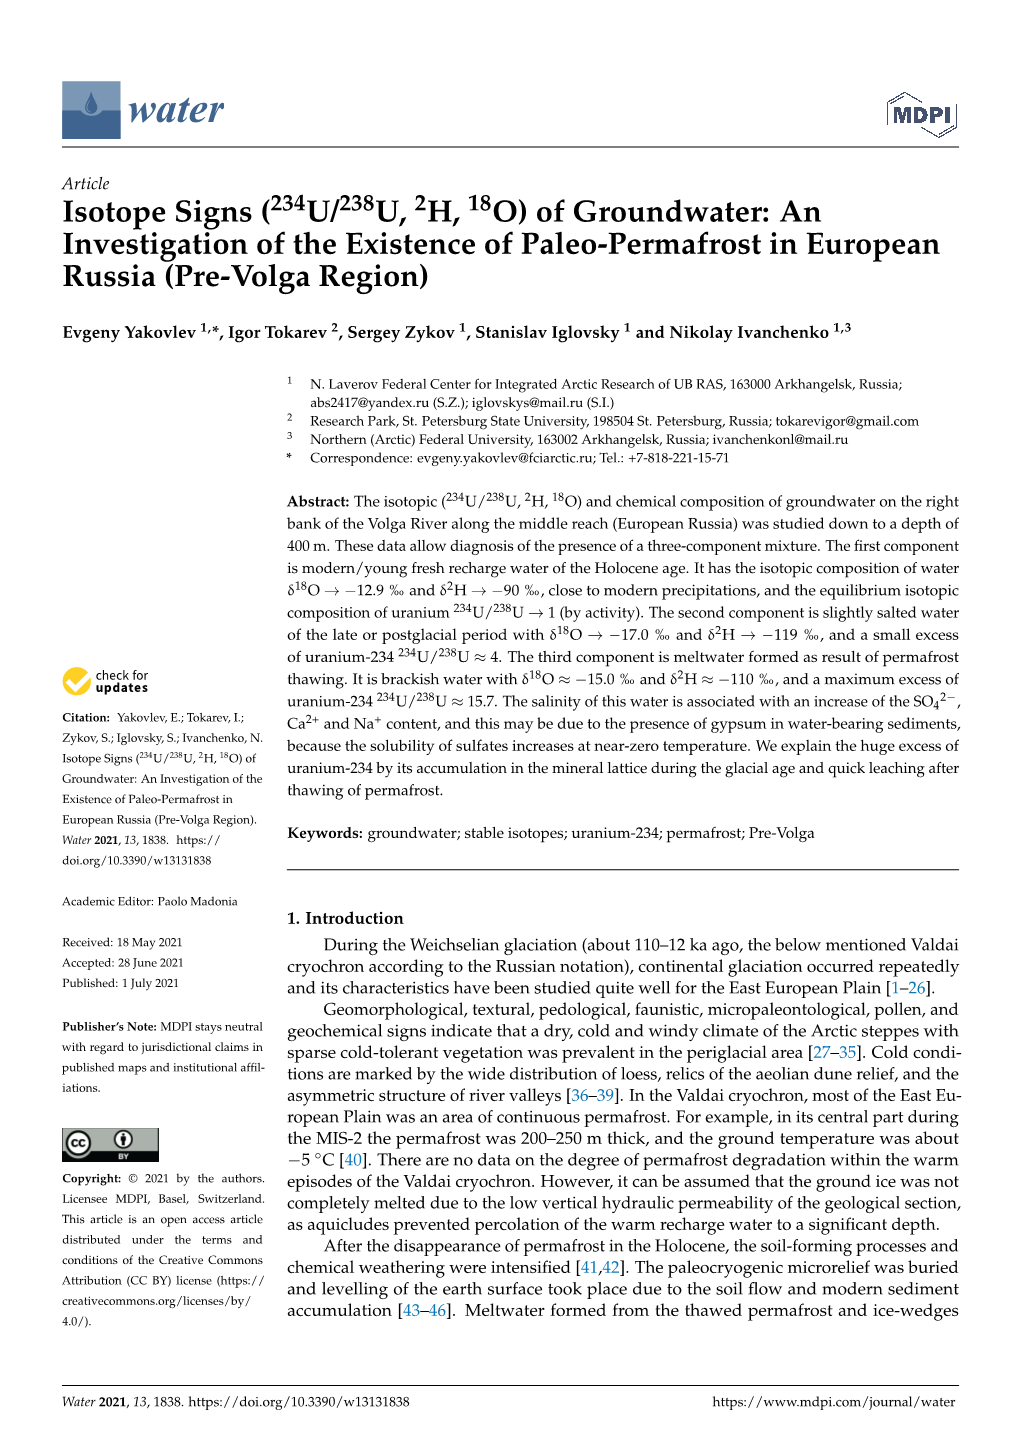 234U/238U, 2H, 18O) of Groundwater: an Investigation of the Existence of Paleo-Permafrost in European Russia (Pre-Volga Region